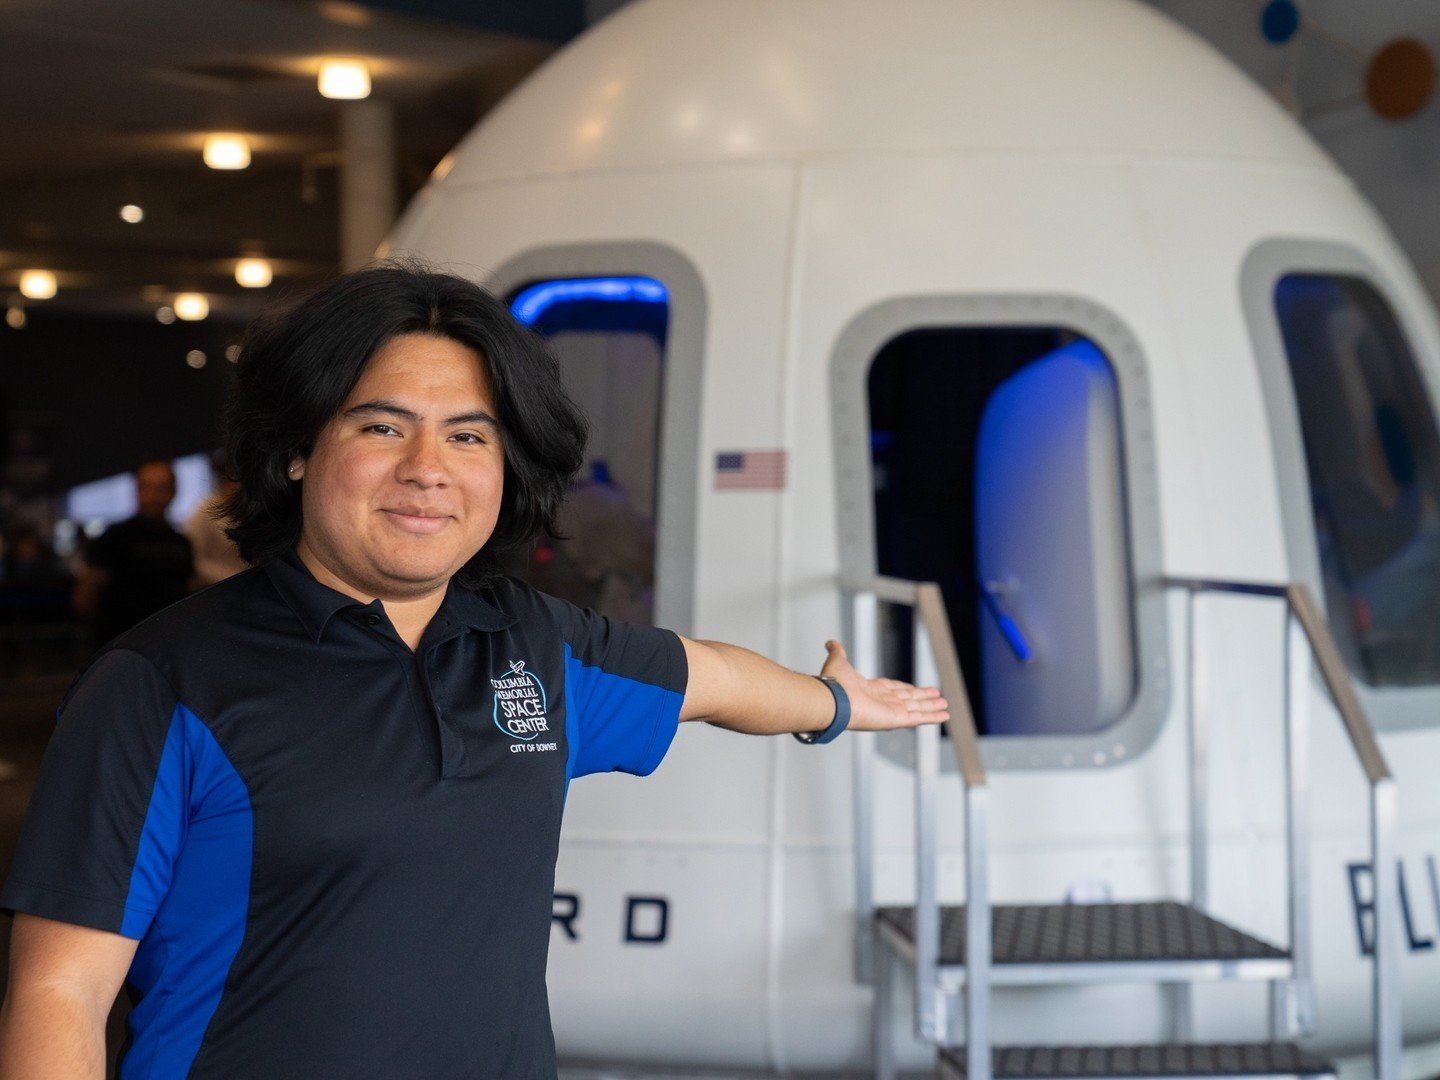 Witness the marvel of space travel with the New Shepard crew capsule! 🚀 ⁠
Come take a tour and experience it firsthand while it's in town.💫⁠
⁠
⁠
✨️Tour Schedule ✨️⁠
⁠
Tuesday - Friday ⁠
3pm - 5pm⁠
⁠
Saturday⁠
10am - 4pm⁠
⁠
No reservation needed⁠
⁠
